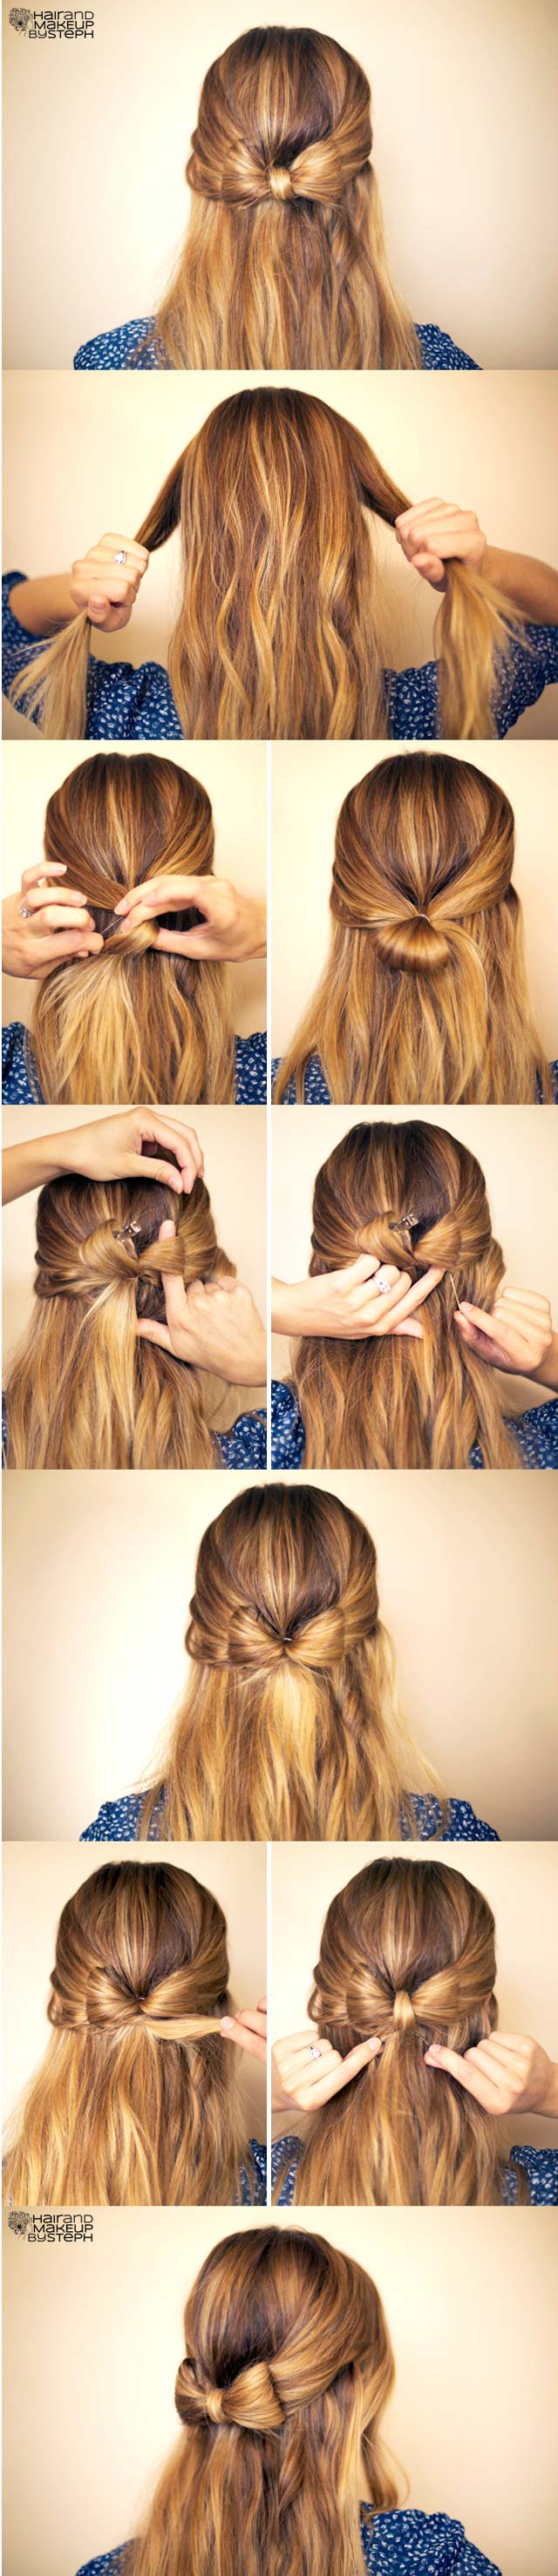 How To: Hair Bow